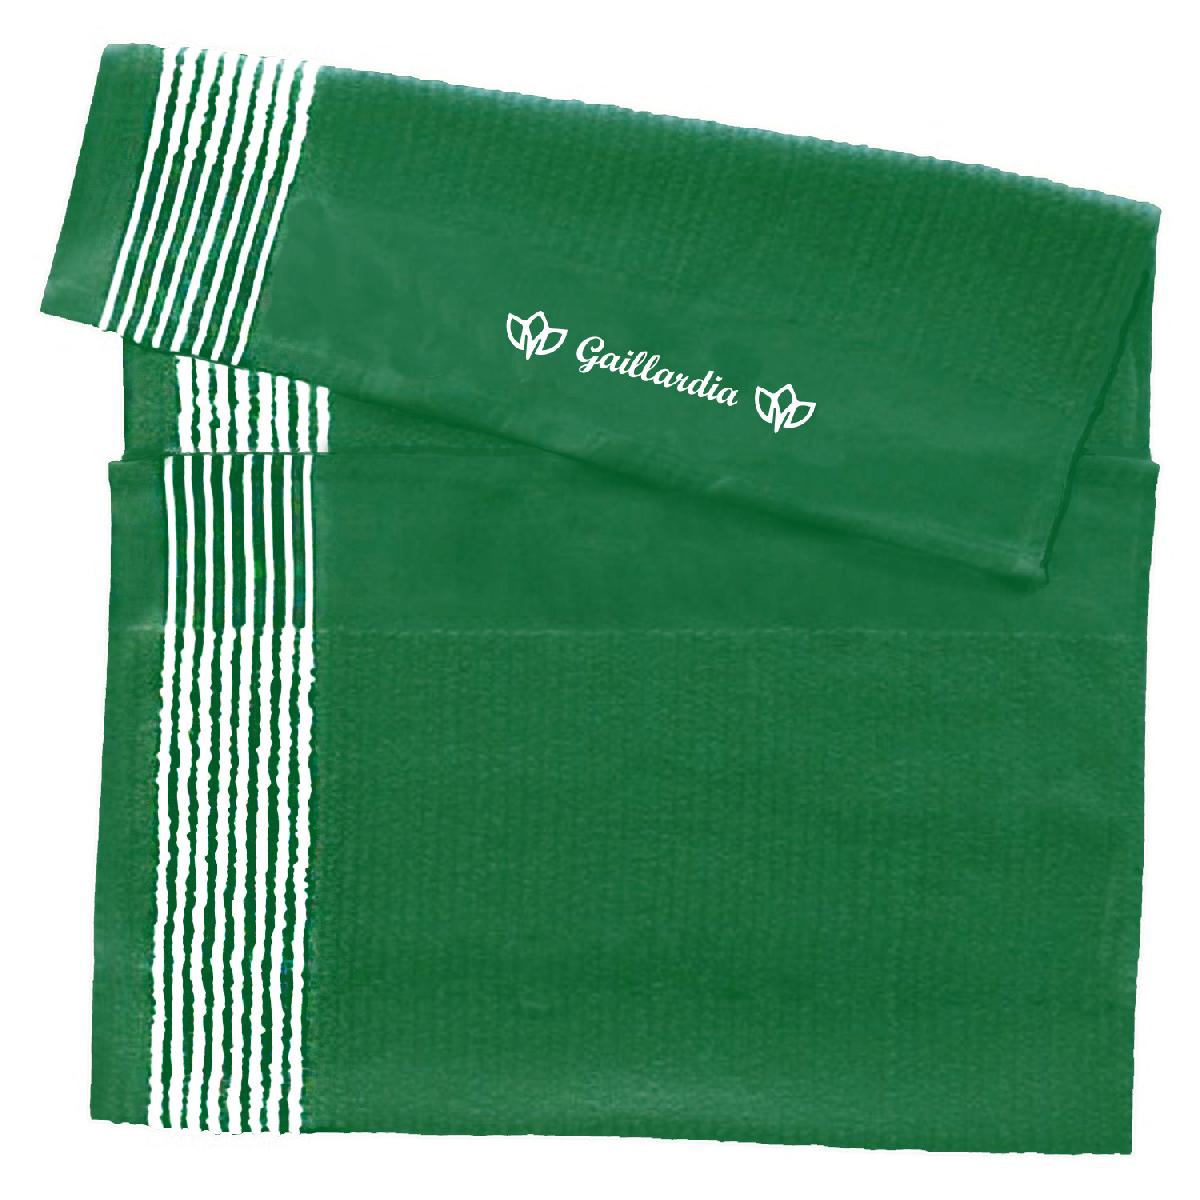 Tour Caddy Golf Towel - Color with White Stripe - Embroidery